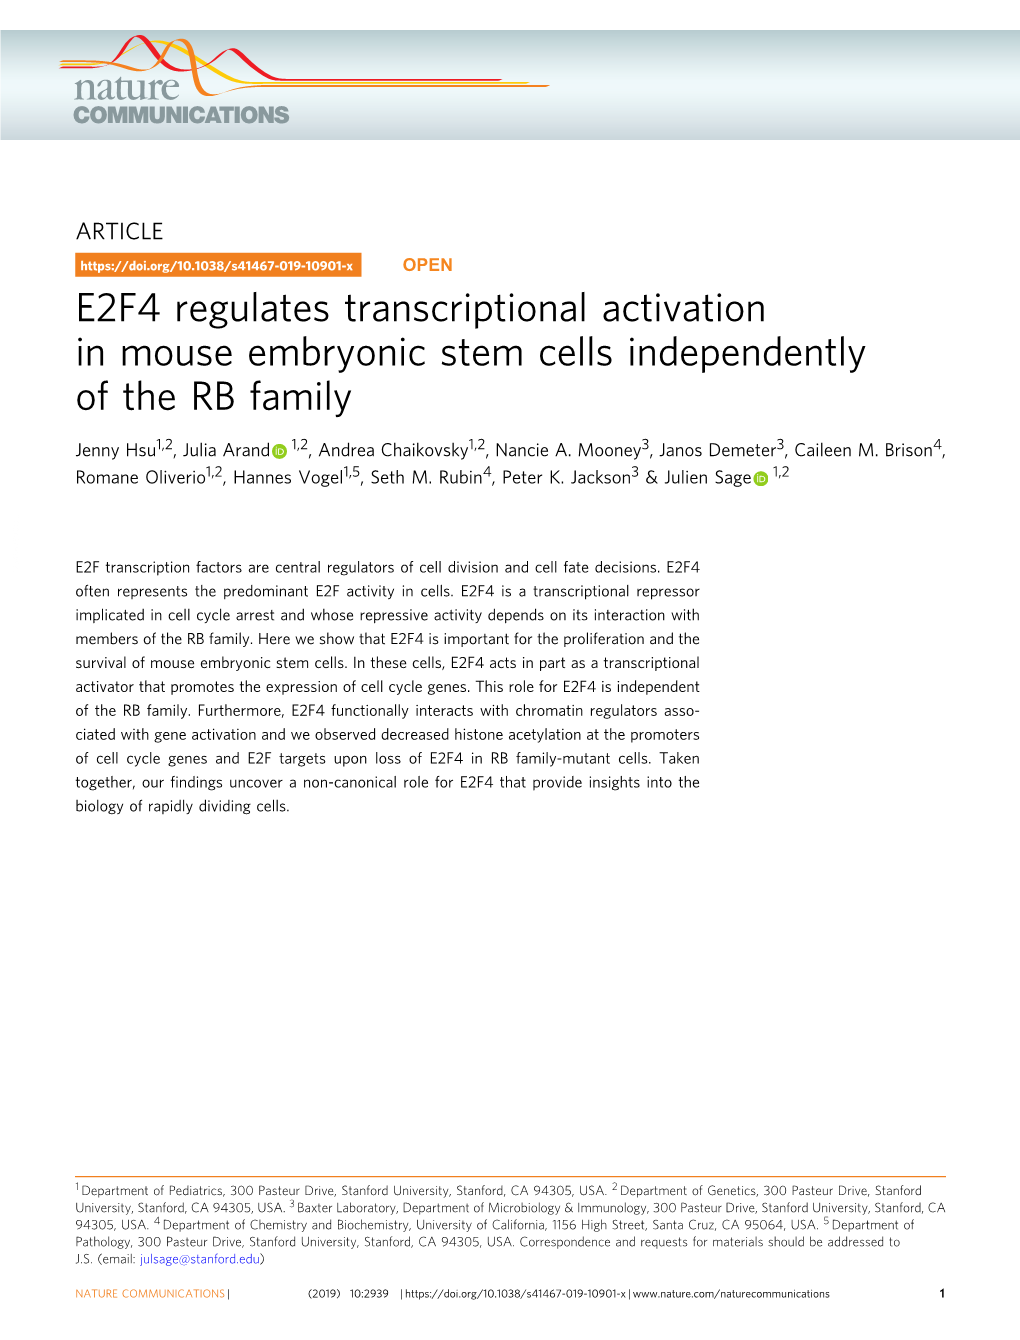 E2F4 Regulates Transcriptional Activation in Mouse Embryonic Stem Cells Independently of the RB Family